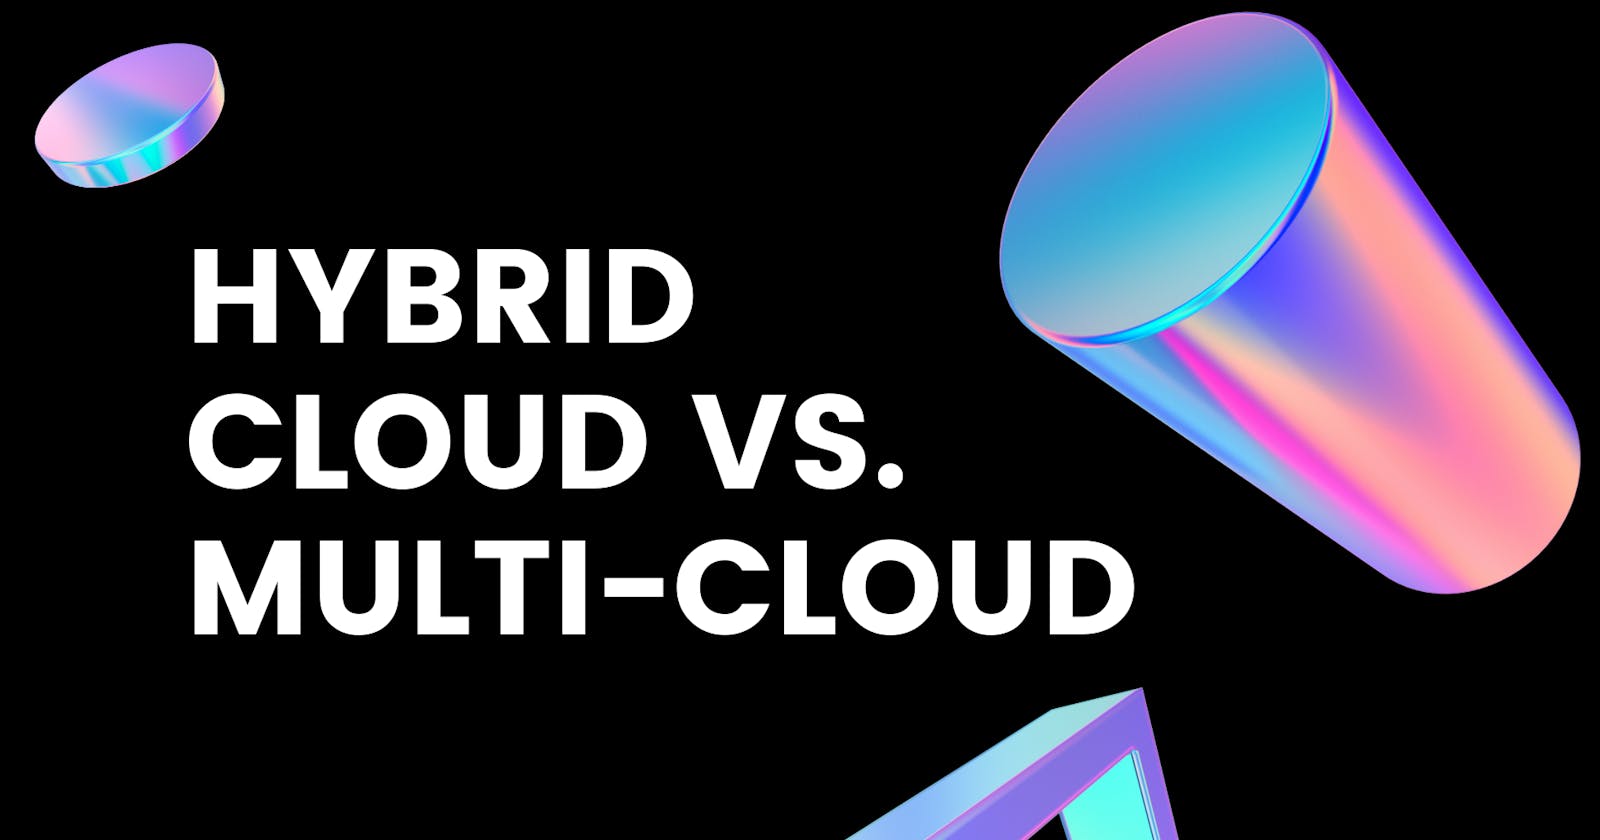 Hybrid Cloud vs. Multi-Cloud: Which Strategy Is Right for Your Business?